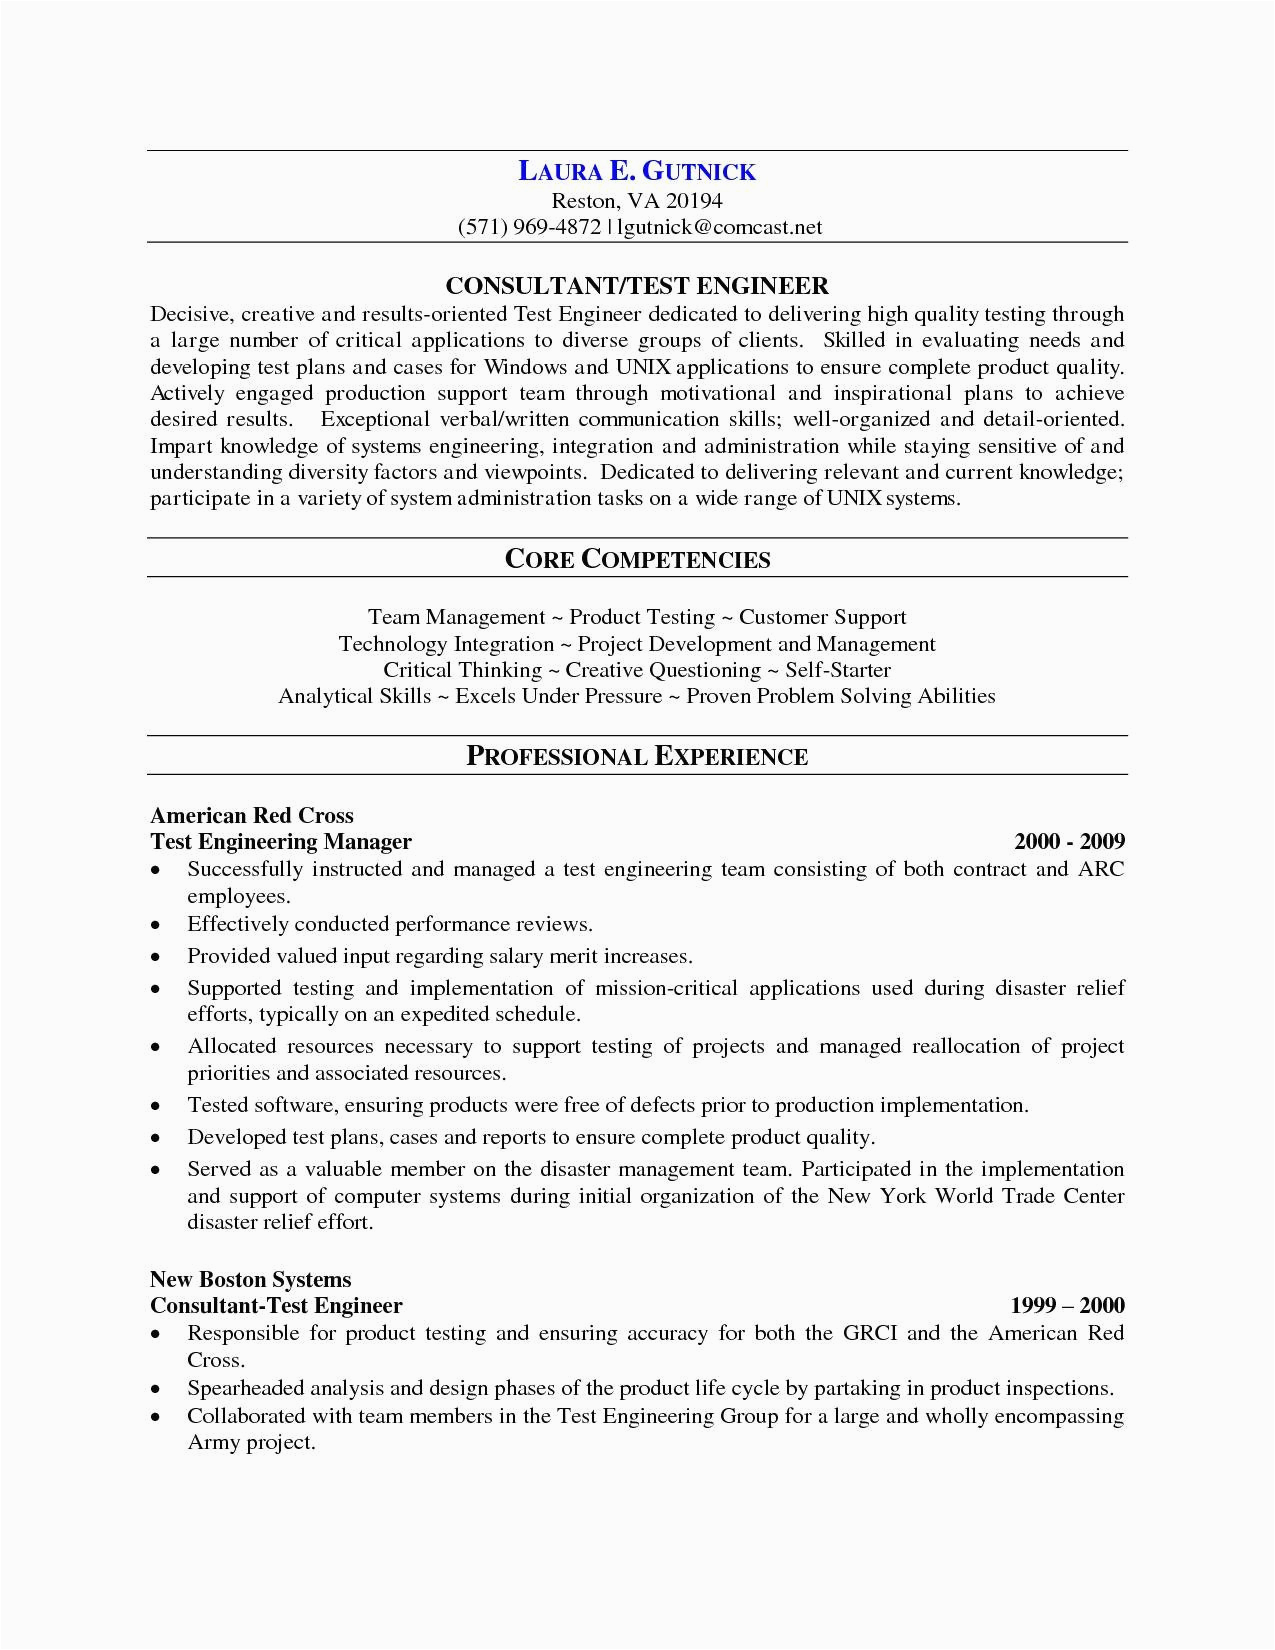 Sample Resume for software Tester 2 Years Experience Sample Resume for software Tester 2 Years Experience